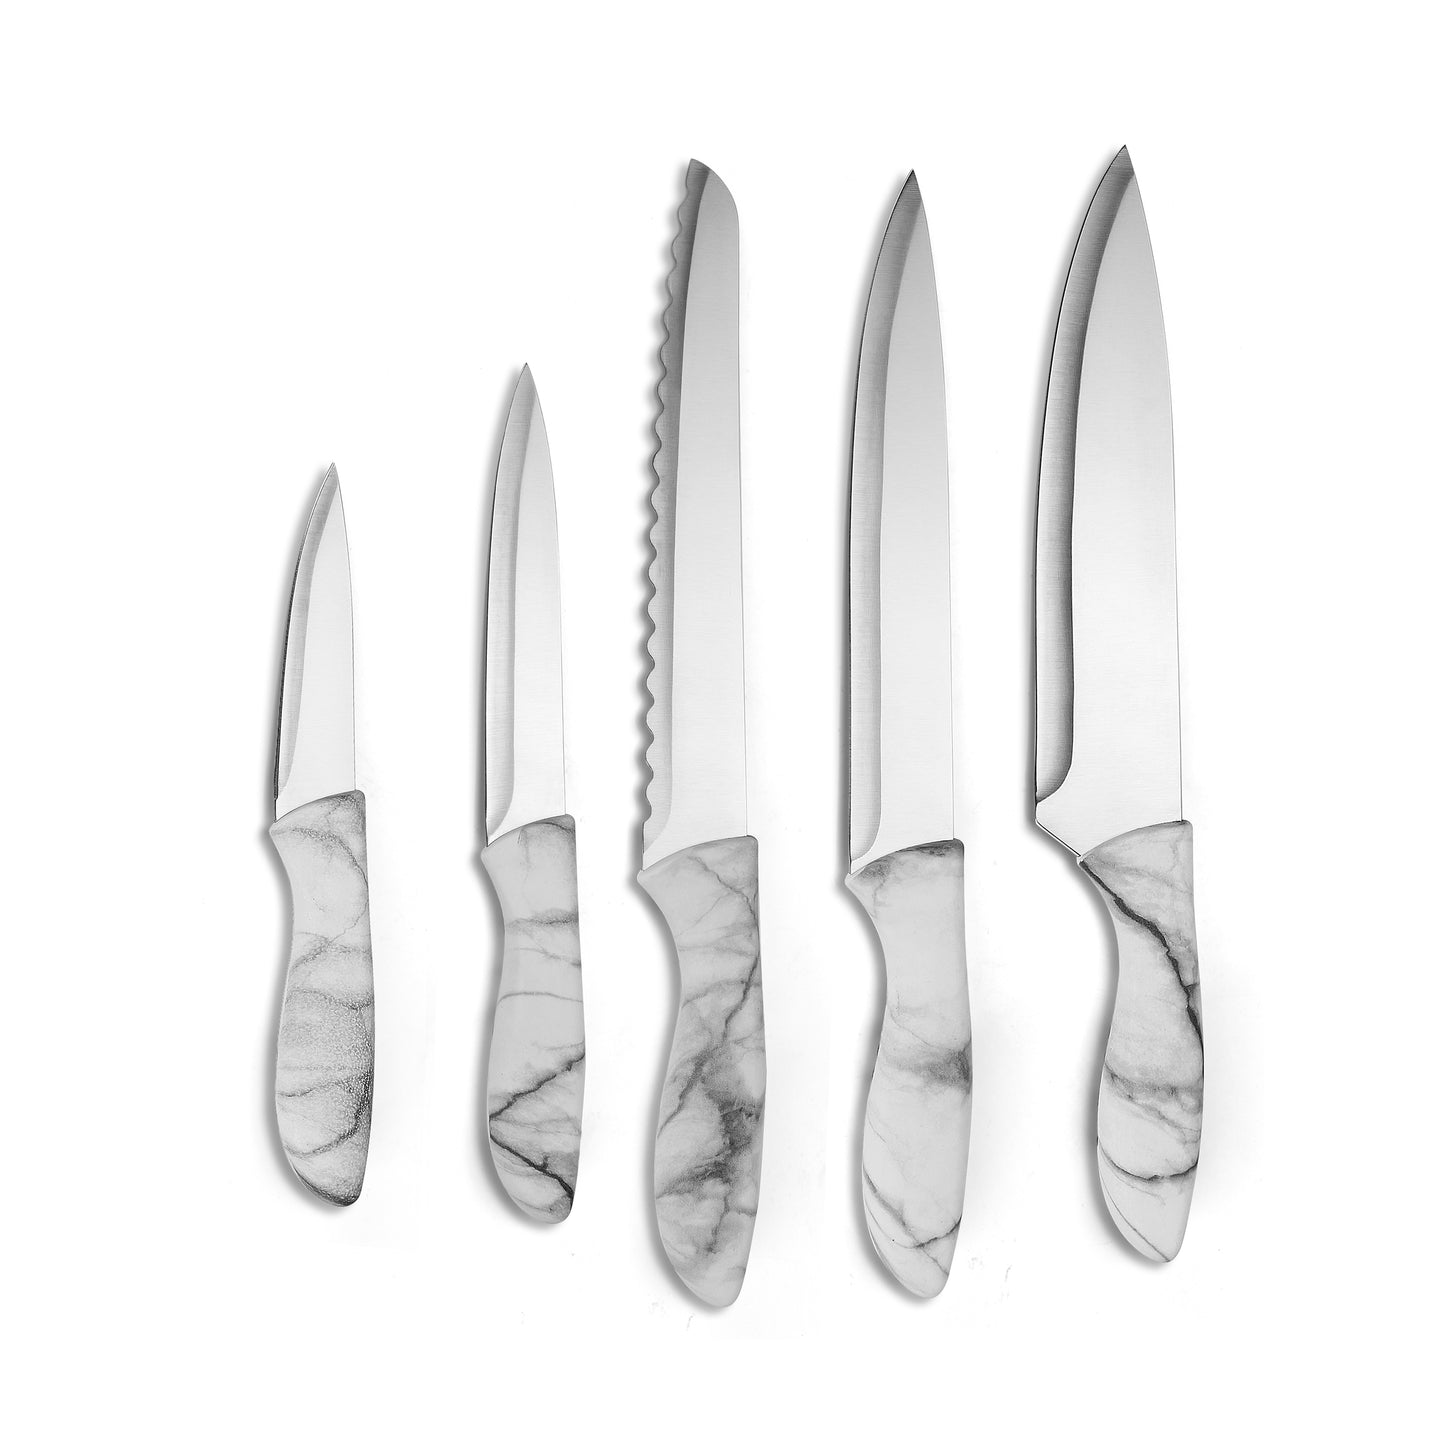 12 PC Cooking Utensils and Knife Set